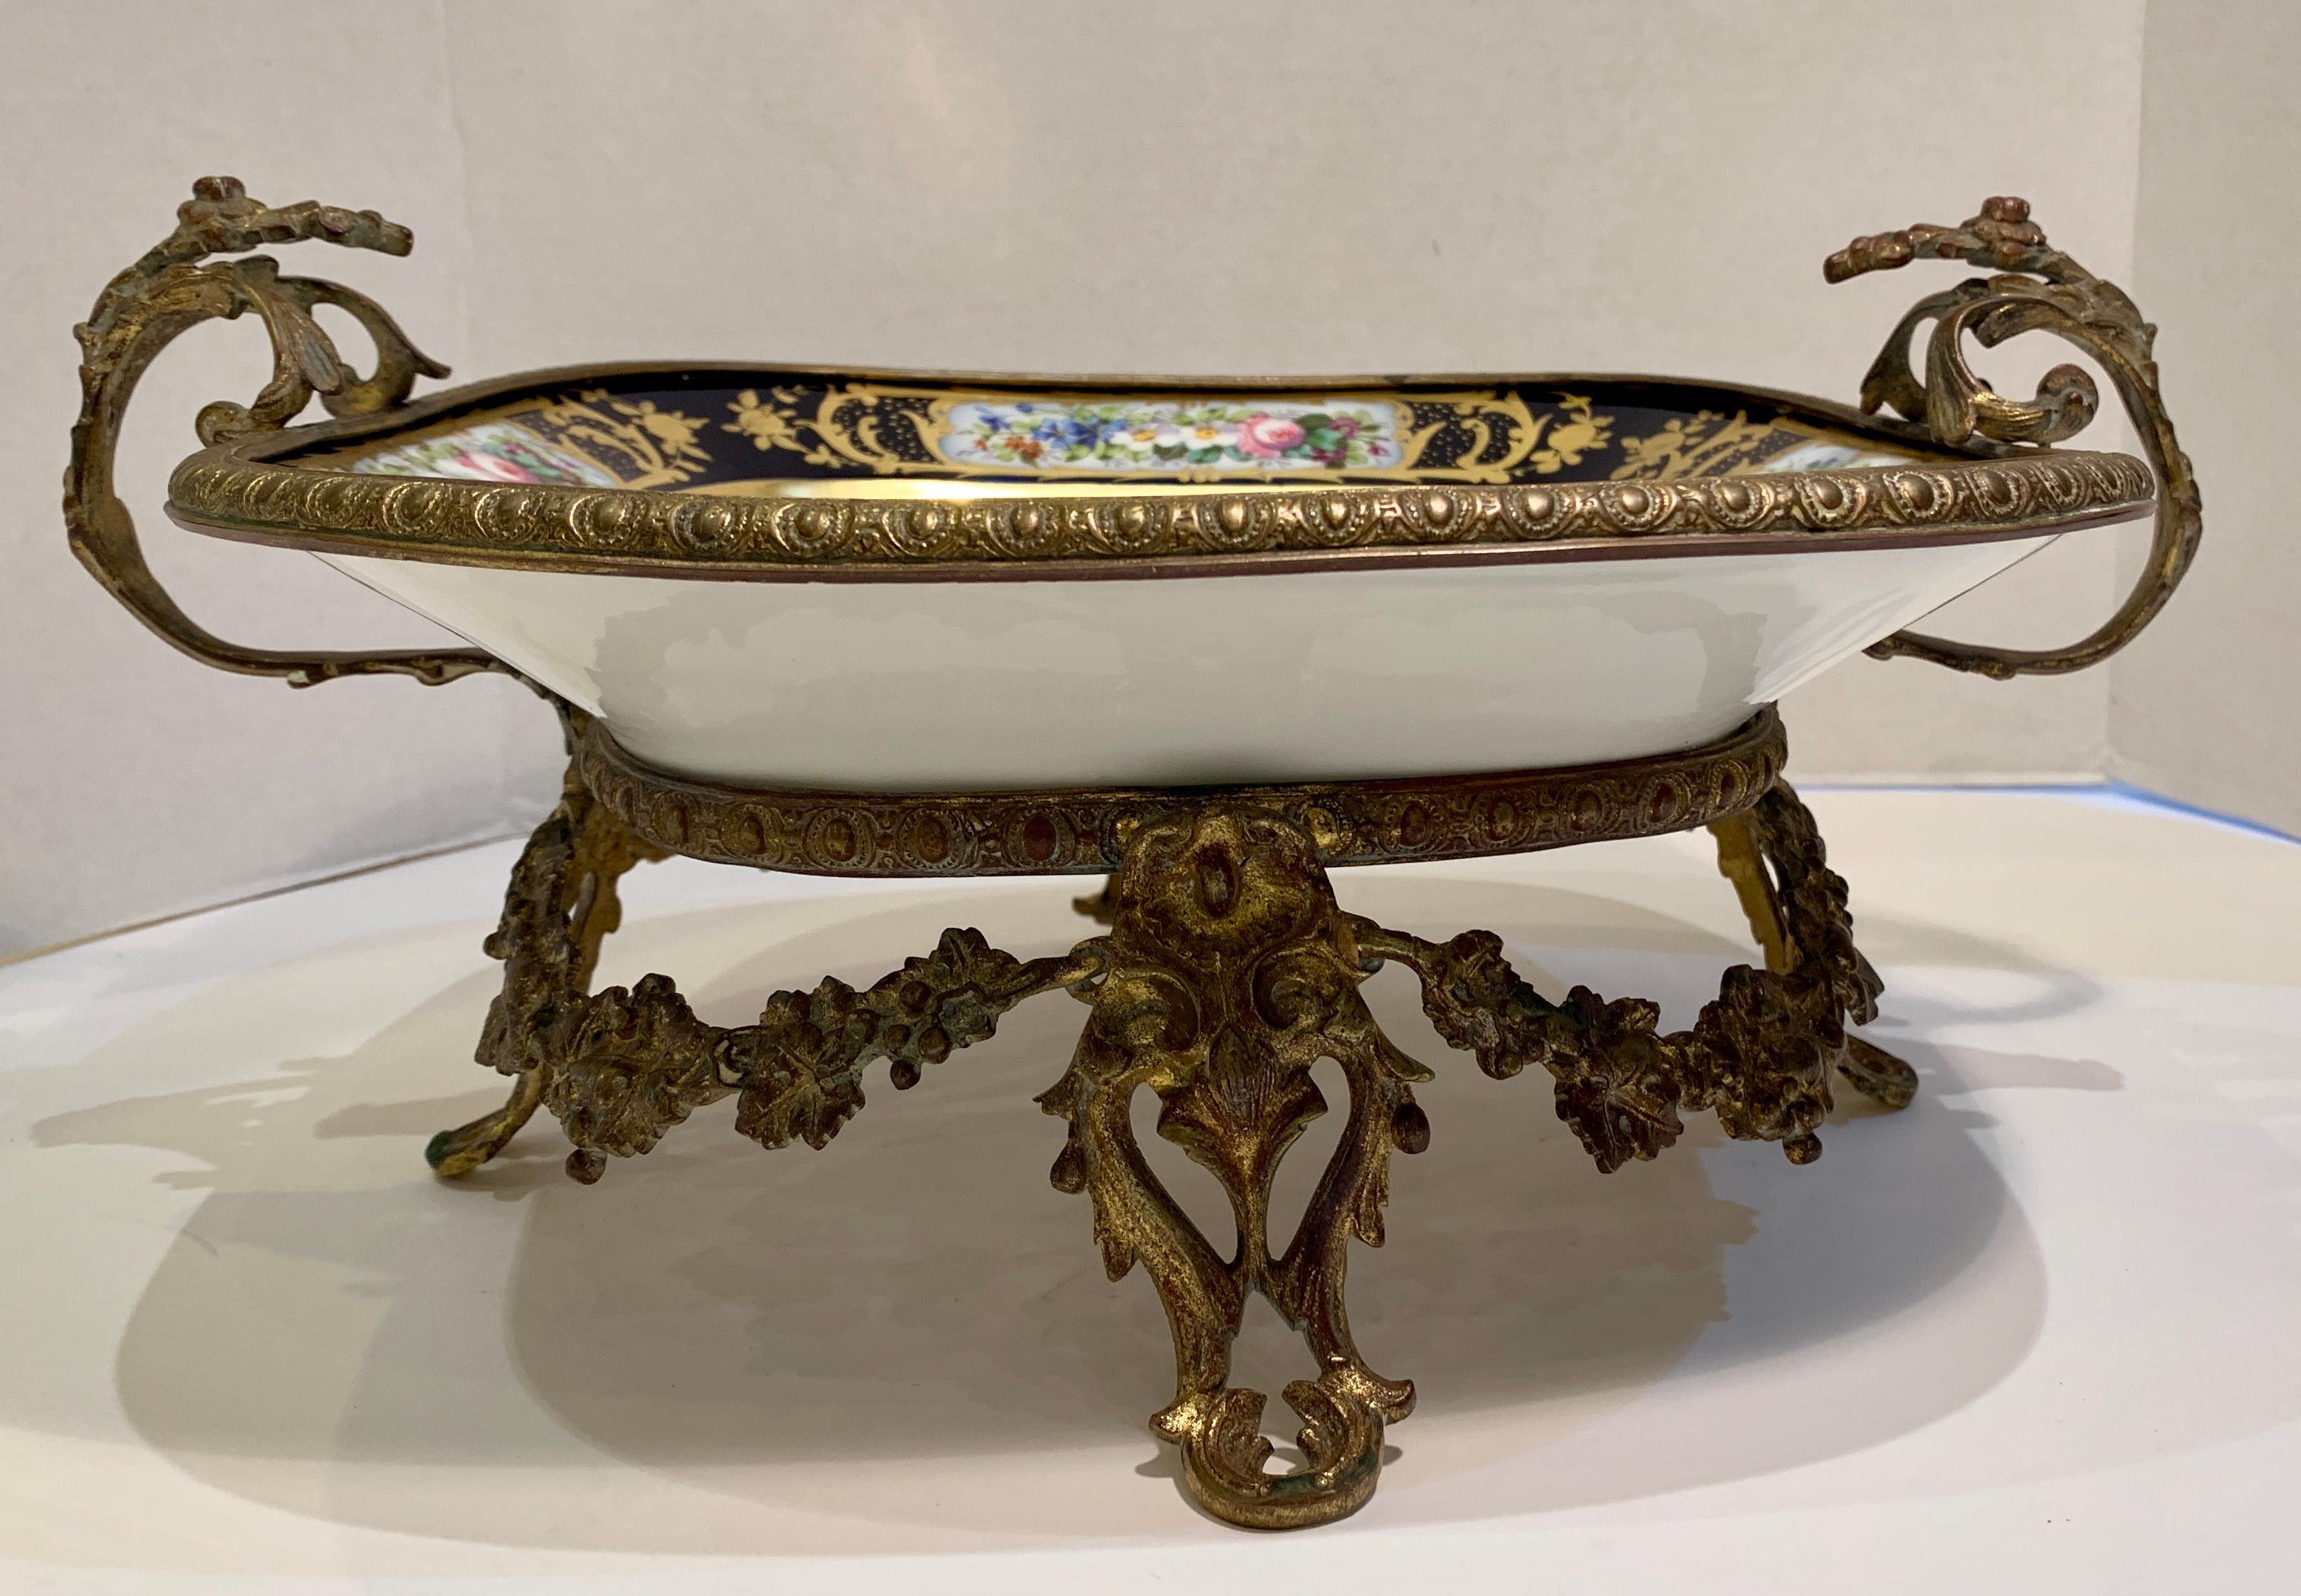 Exquisite Antique French Sevres Cobalt Porcelain and Ormolu Centerpiece Compote In Good Condition For Sale In Tustin, CA